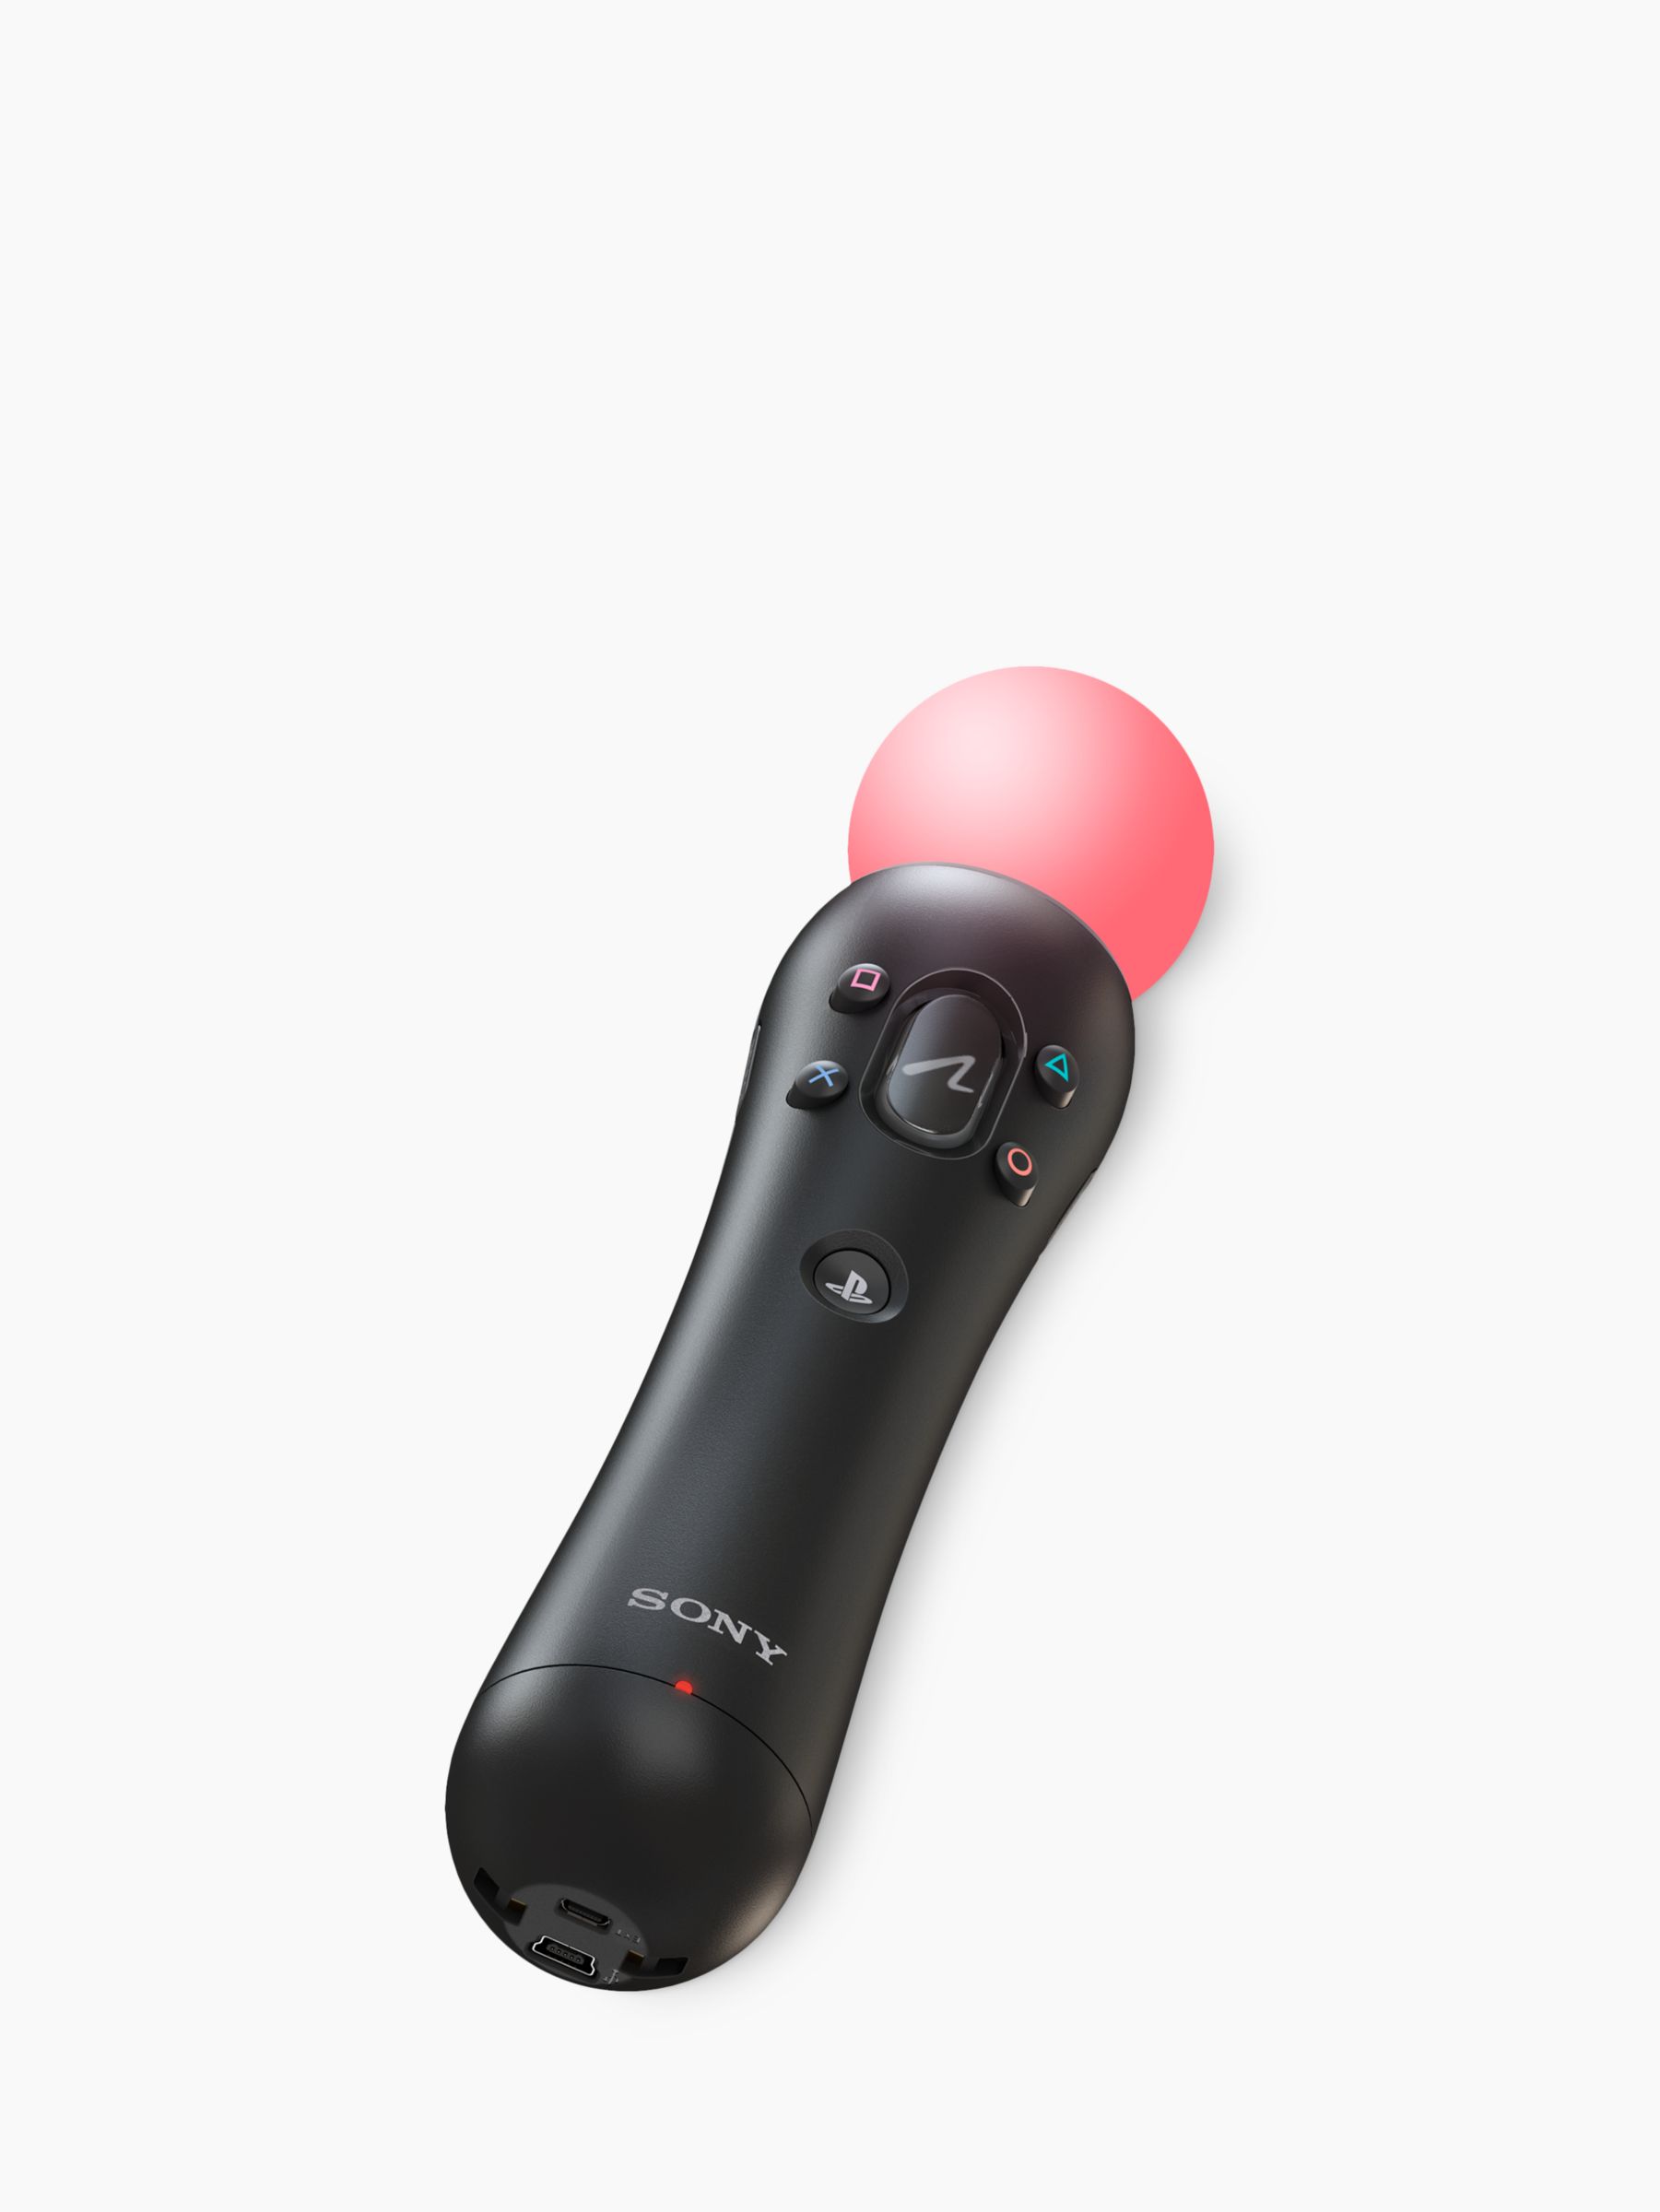 Sony Playstation Move Controller For Ps4 And Ps Vr Headset Twin Pack At John Lewis Partners